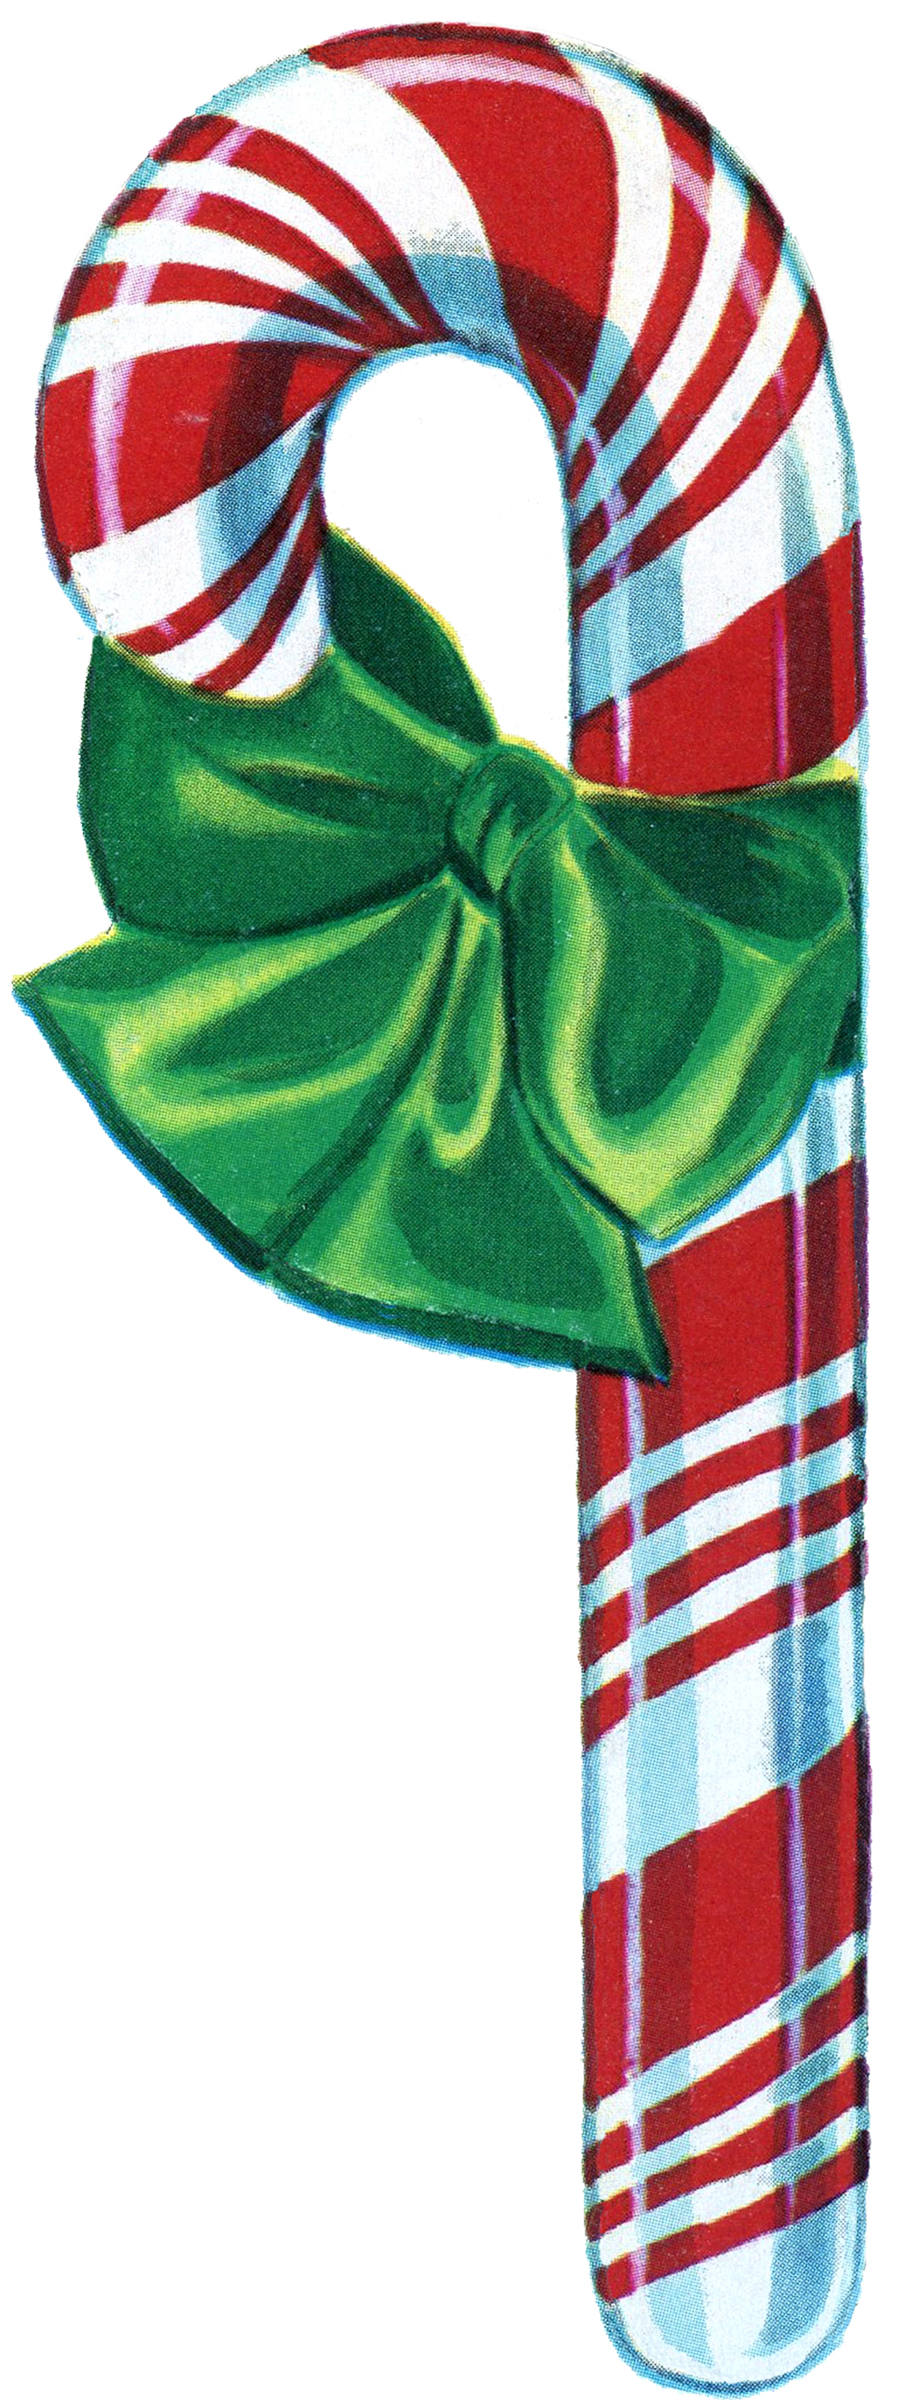 Free Vintage Christmas Clip Art - Candy Cane - The Graphics Fairy